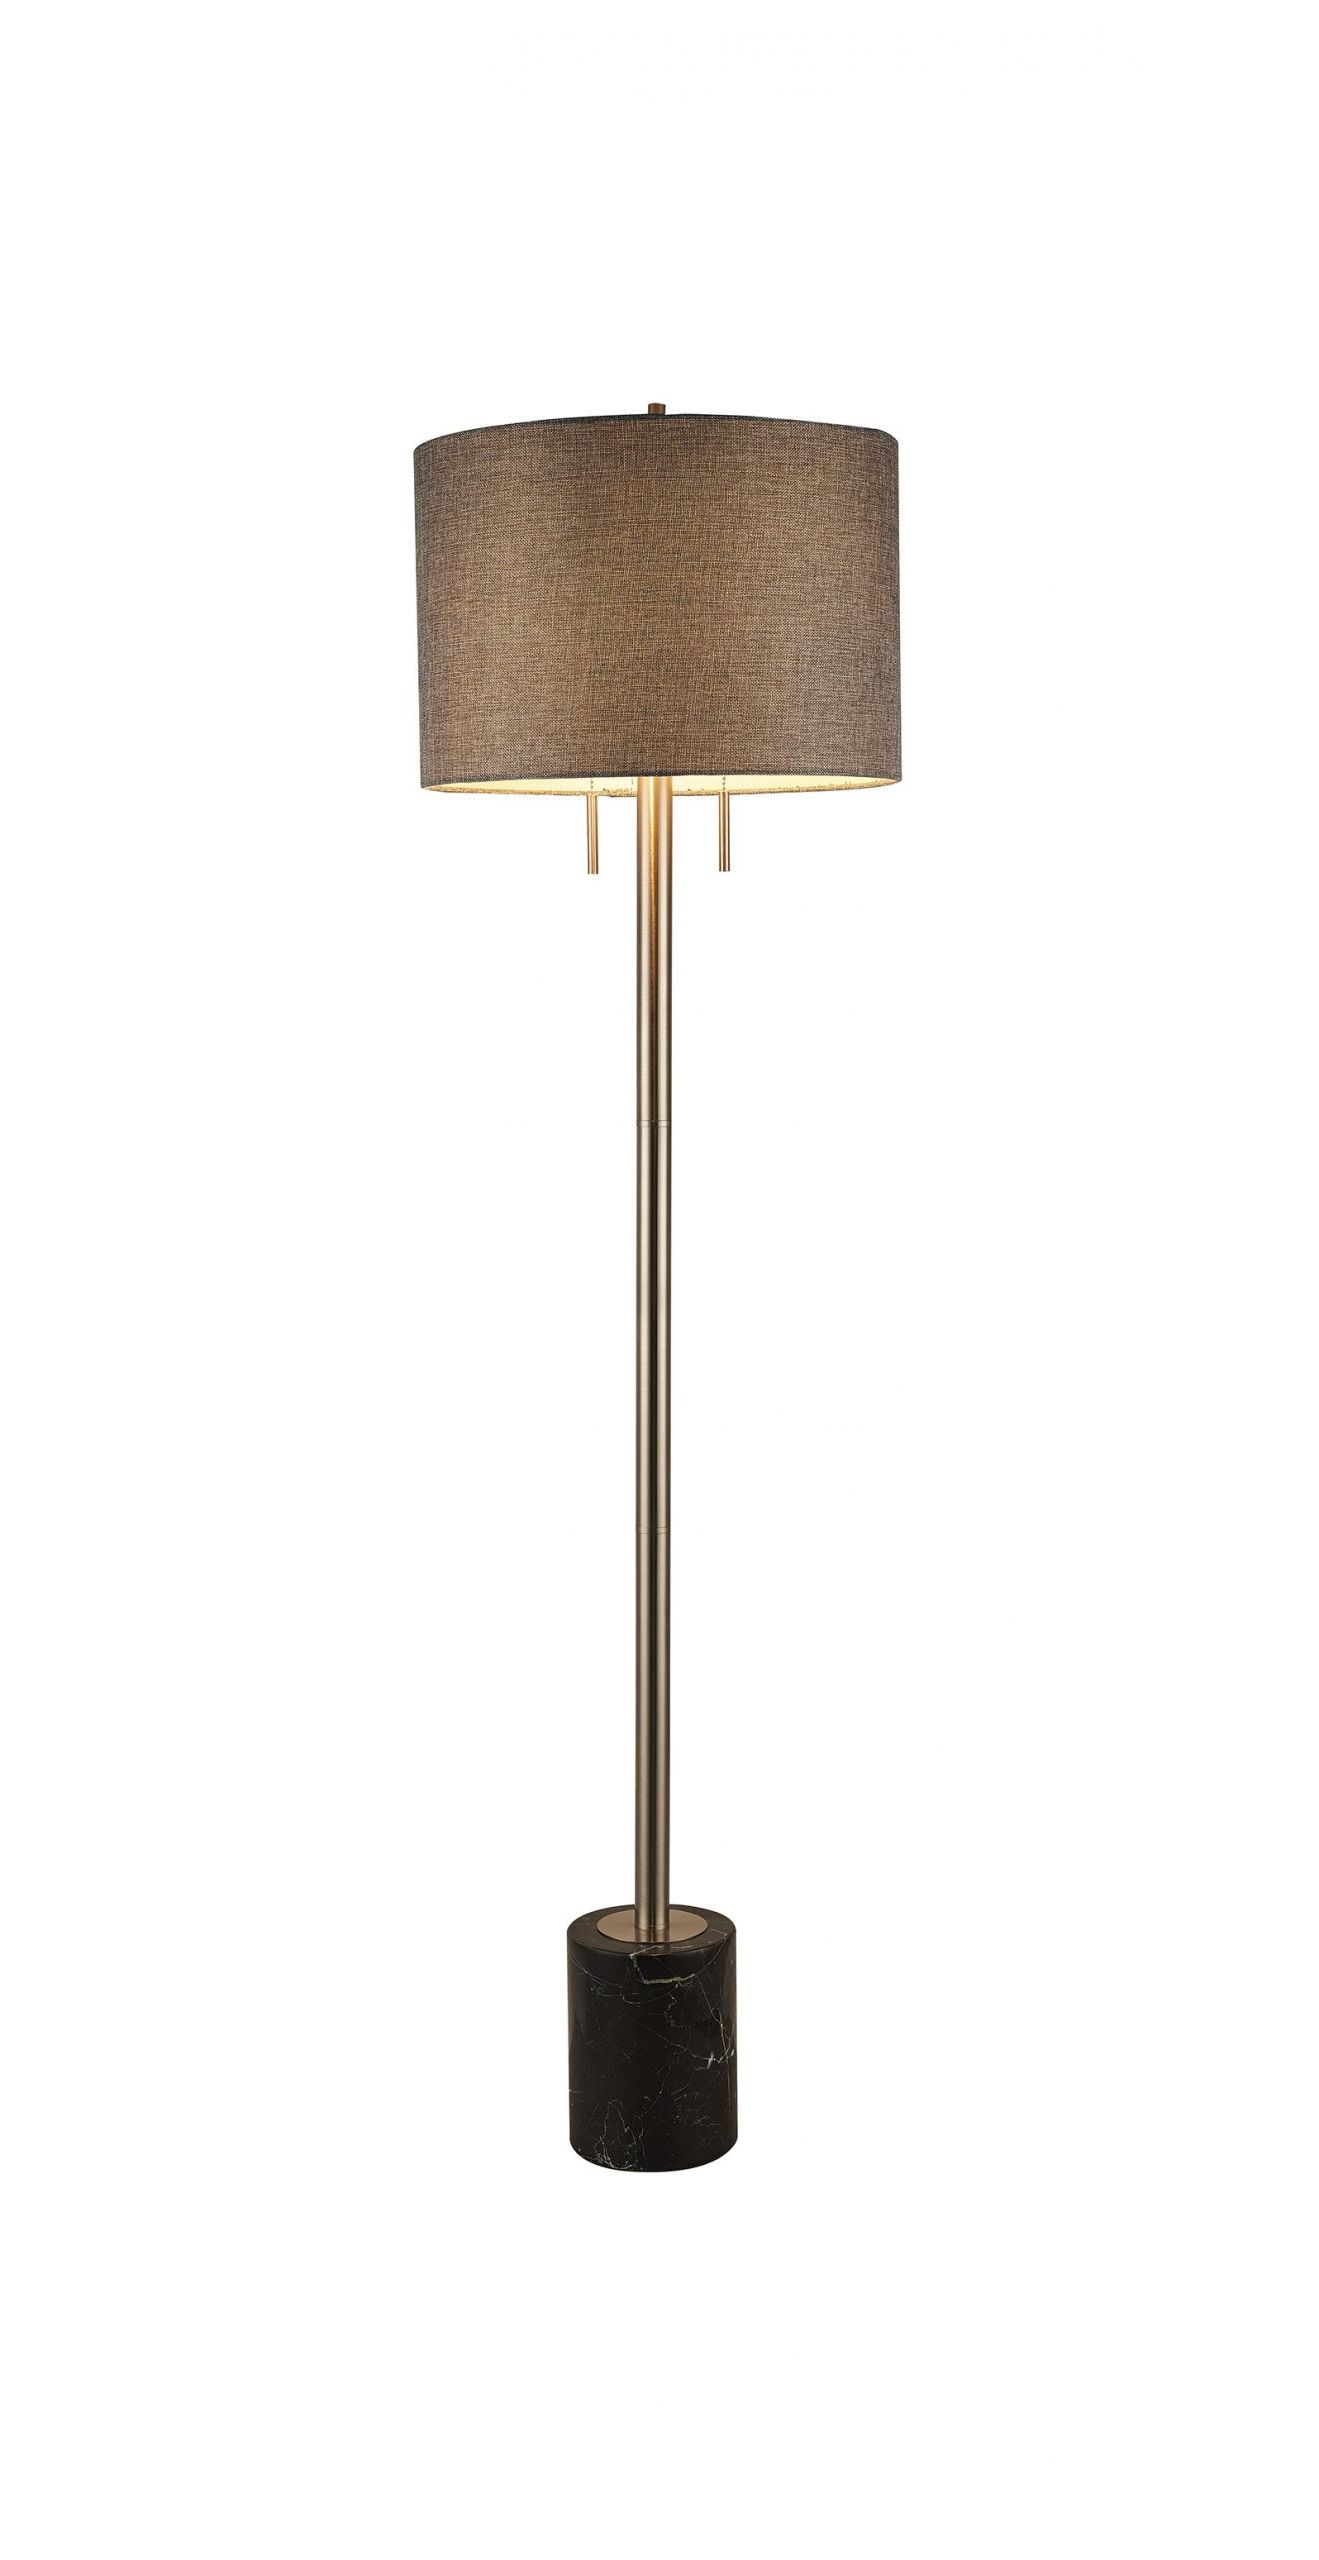 Newest Marble Base Floor Lamp – Façade Interiors & Furniture Regarding Marble Base Standing Lamps (View 3 of 10)